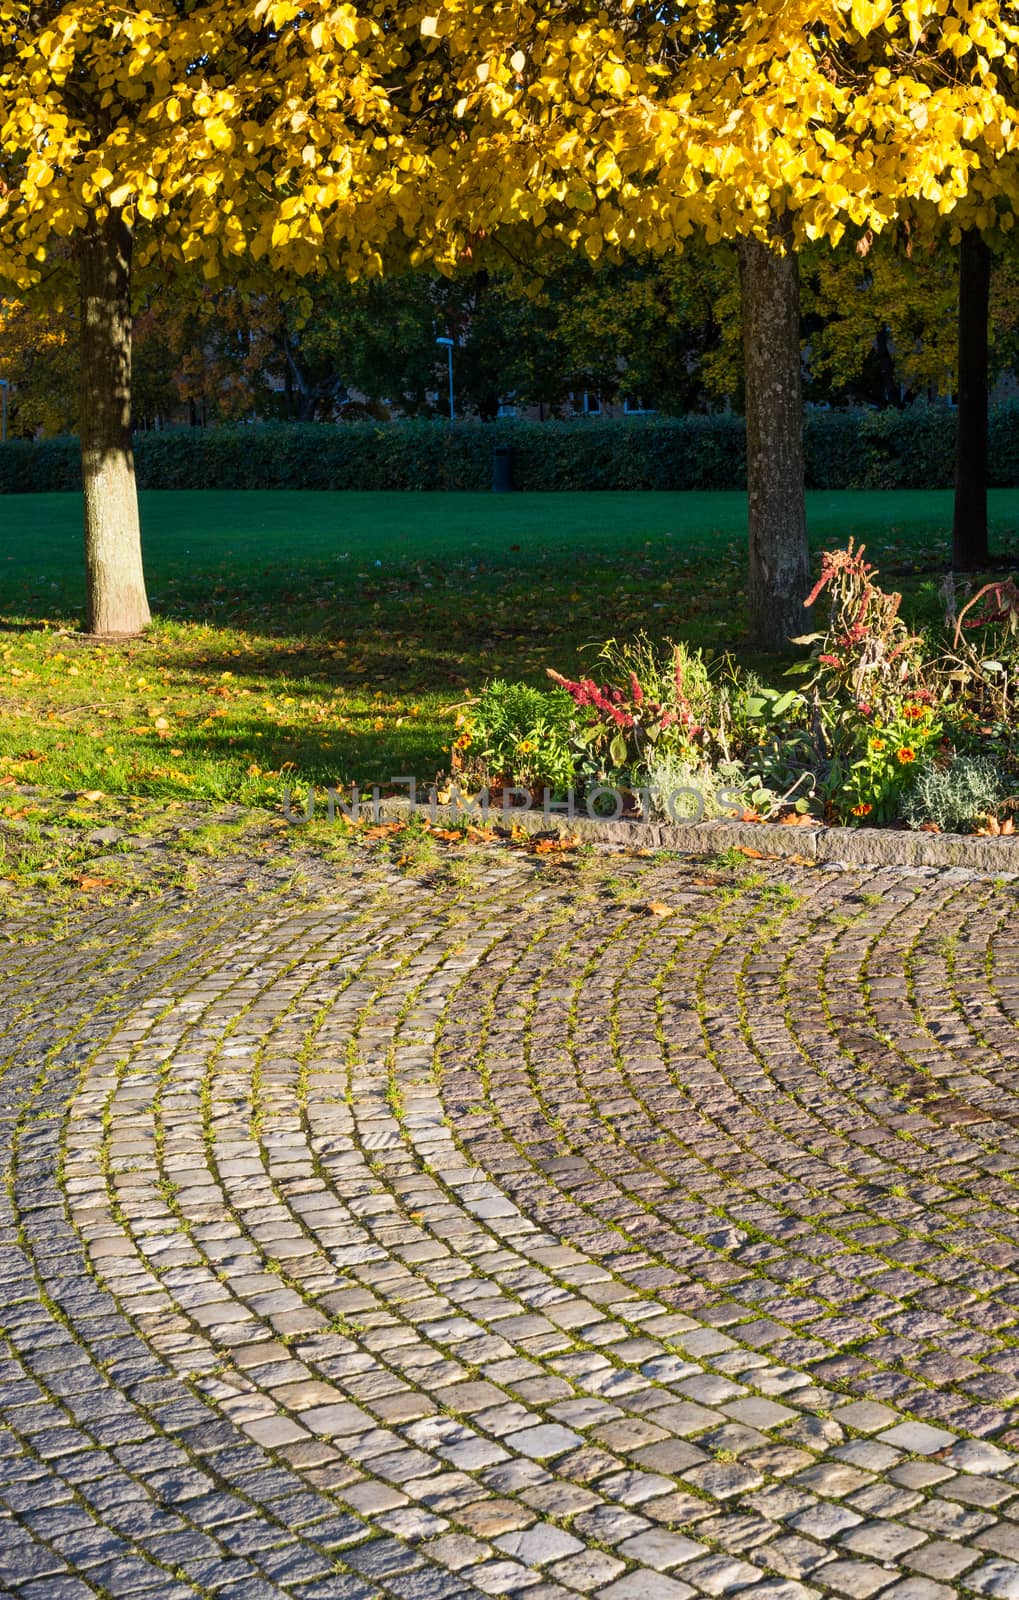 Cobble stone pattern and yellow leaves by ArtesiaWells